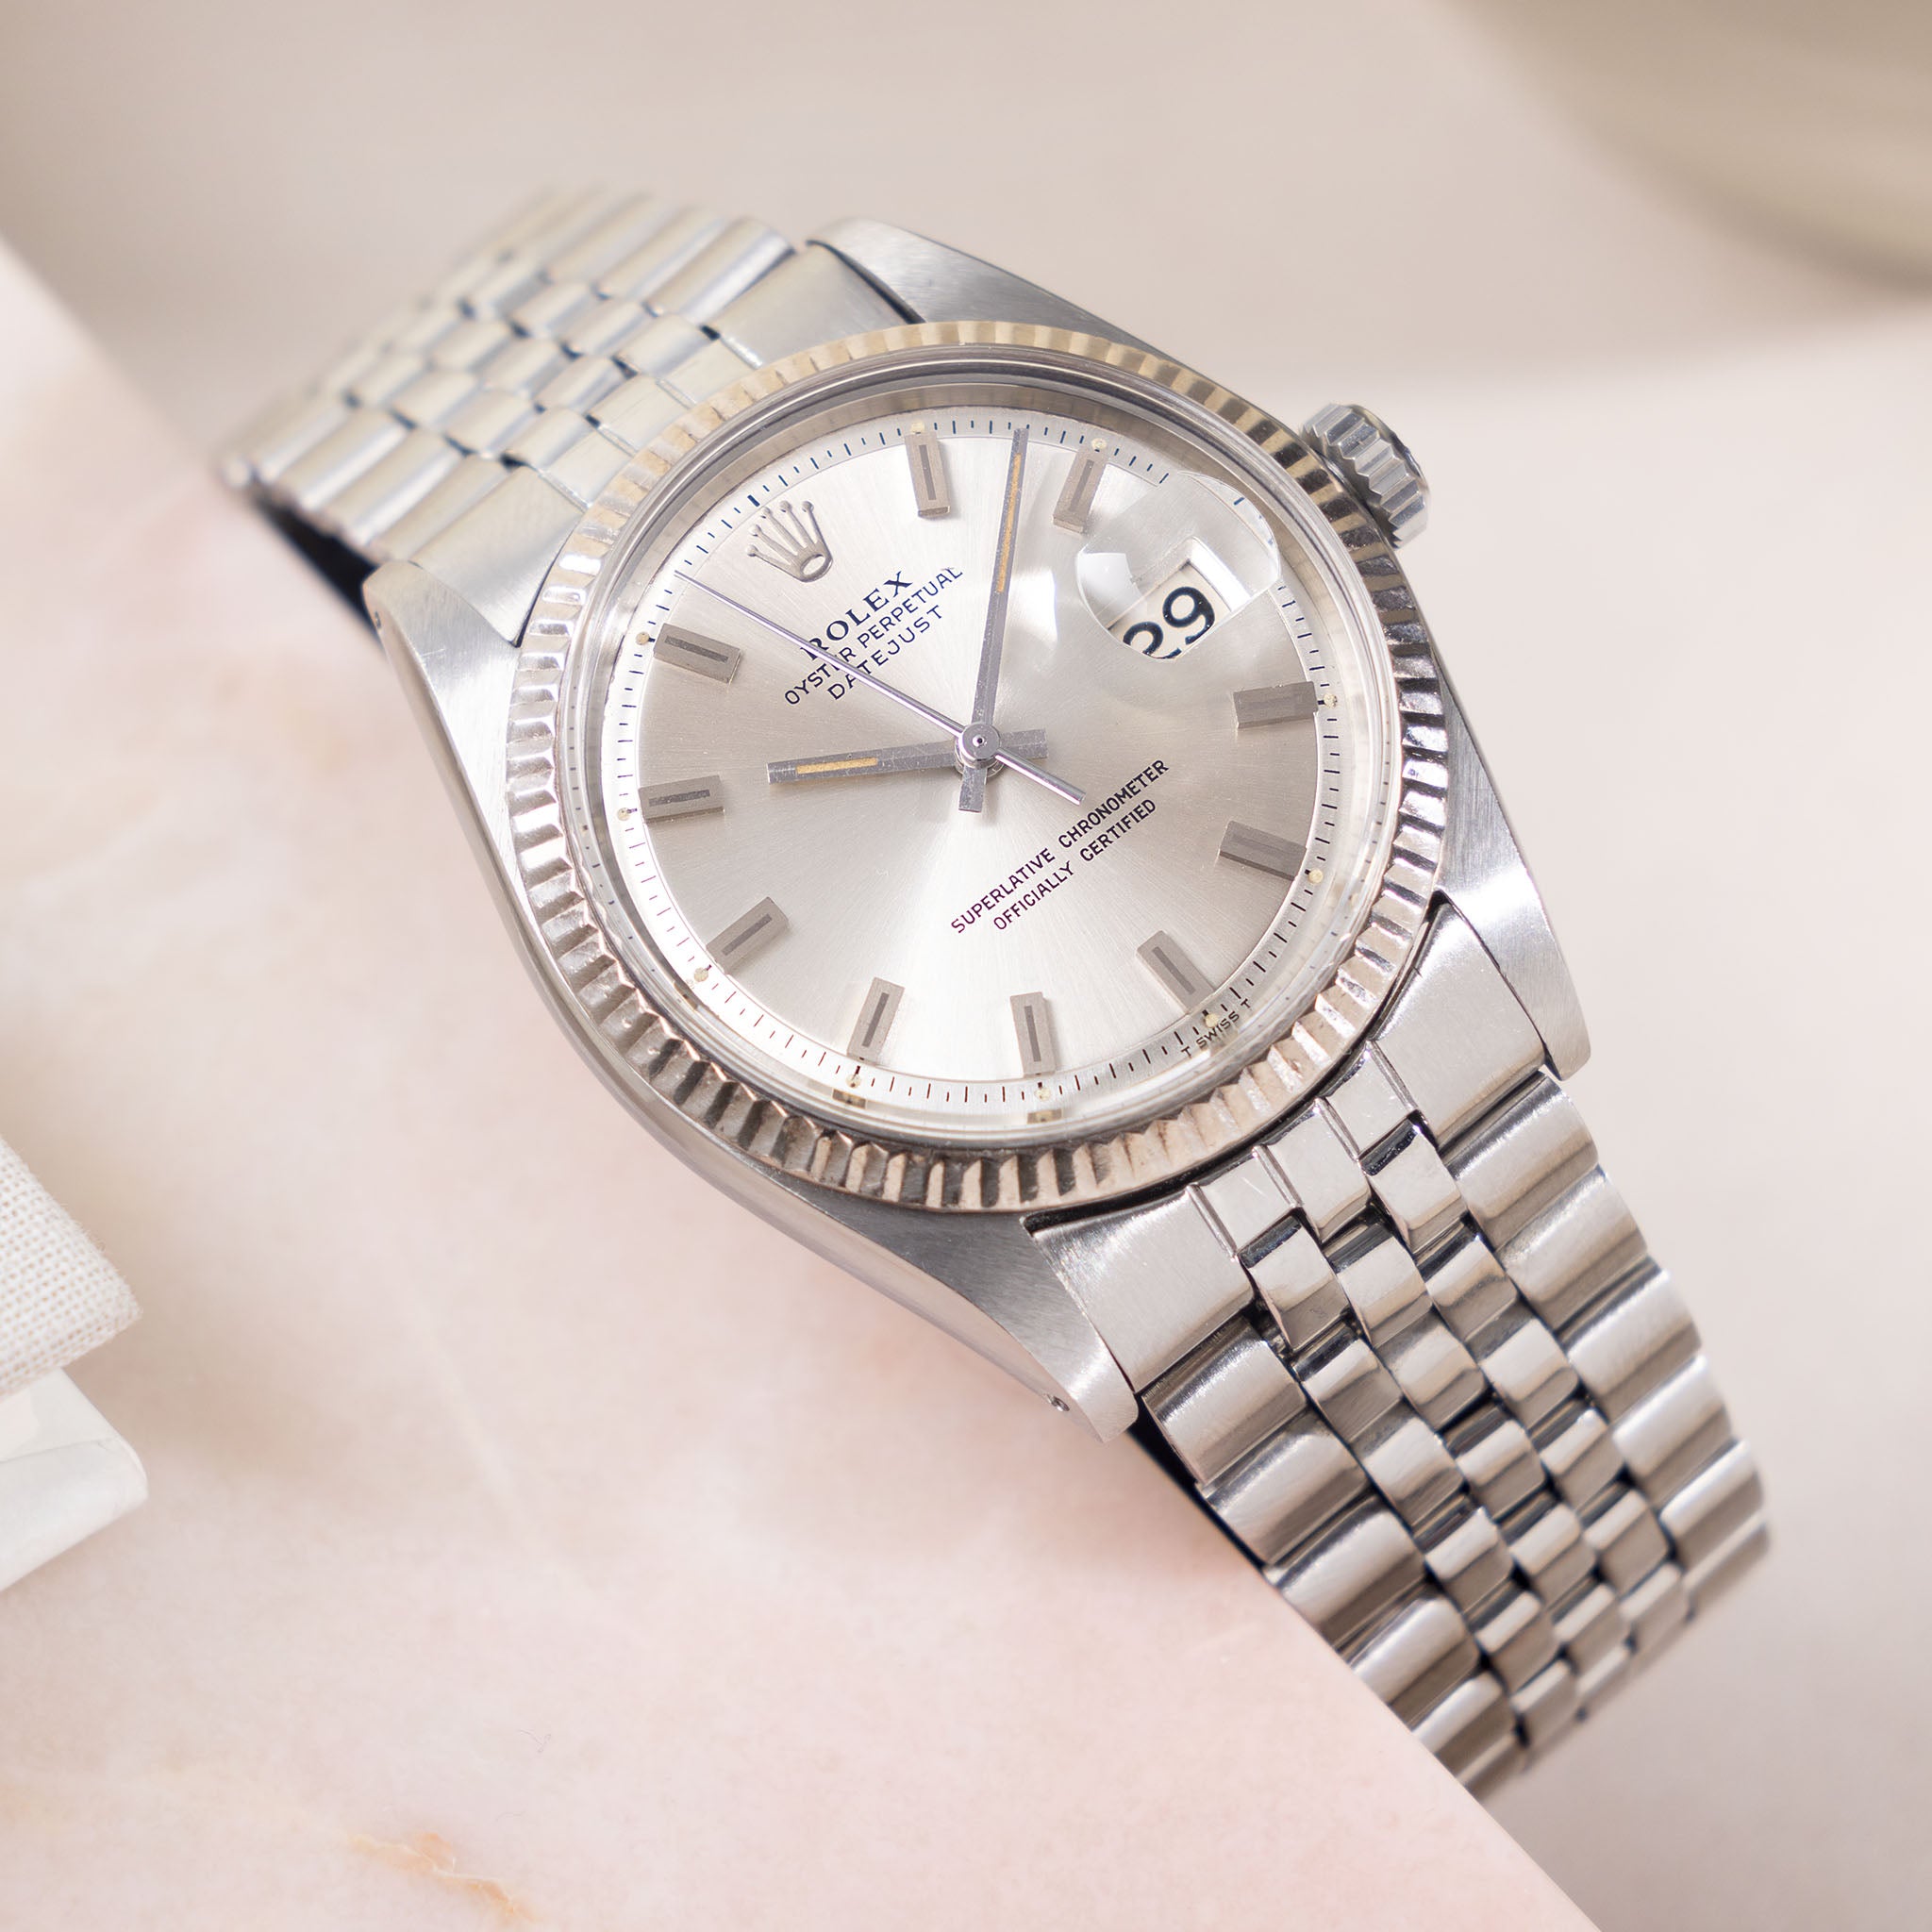 Rolex Datejust rare Singer "block markers silver dial " with box and double punched papers ref 1601